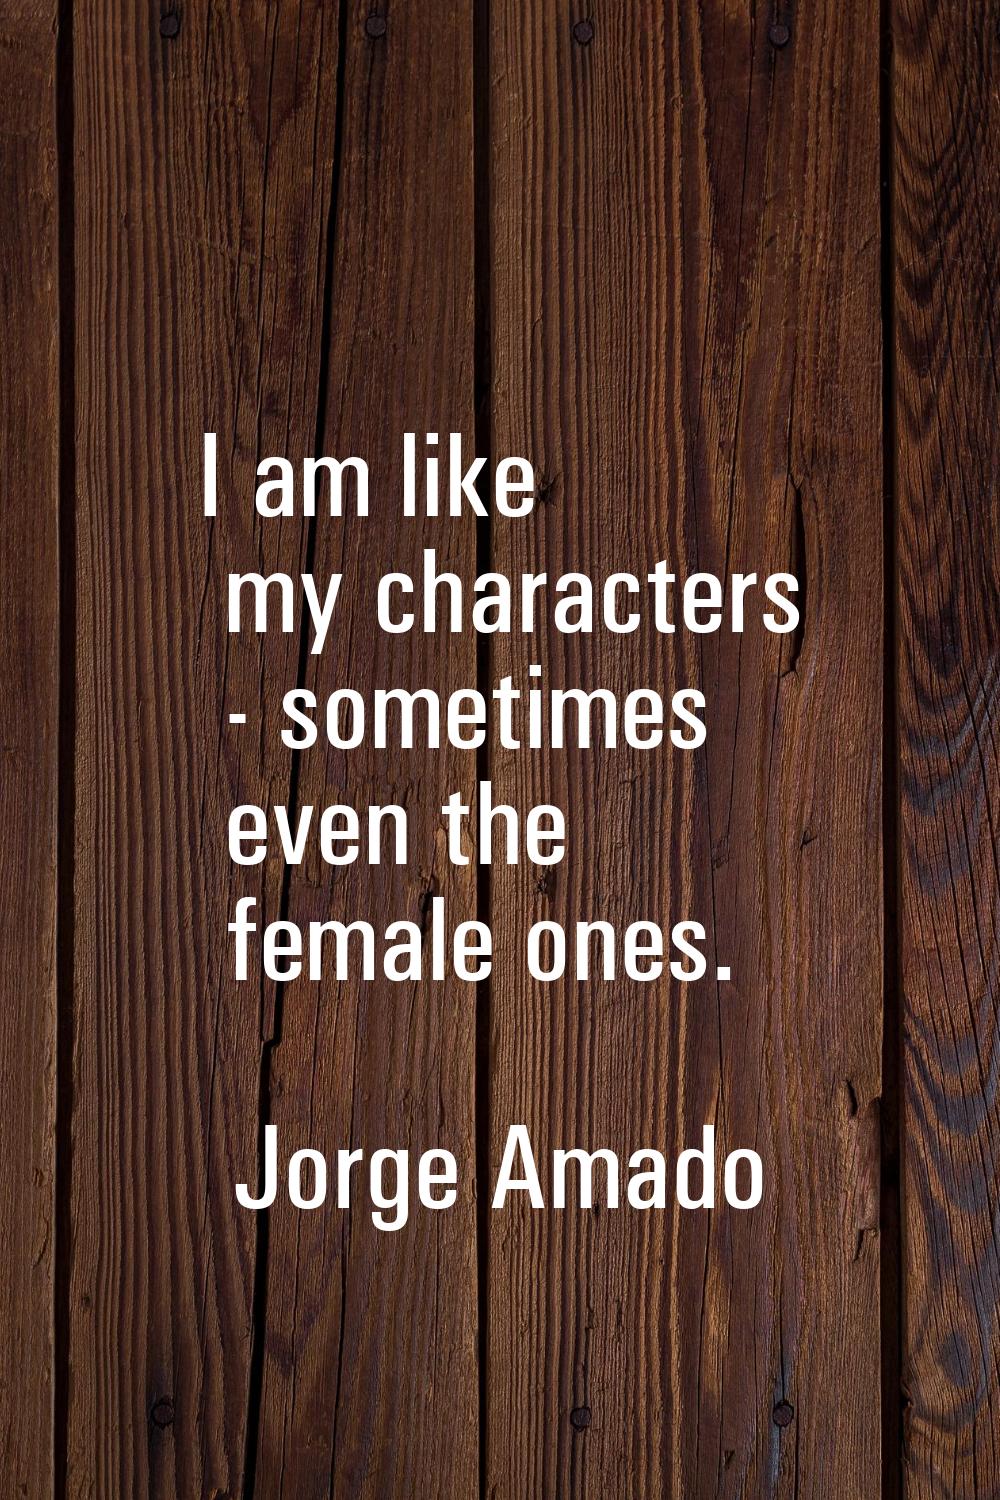 I am like my characters - sometimes even the female ones.